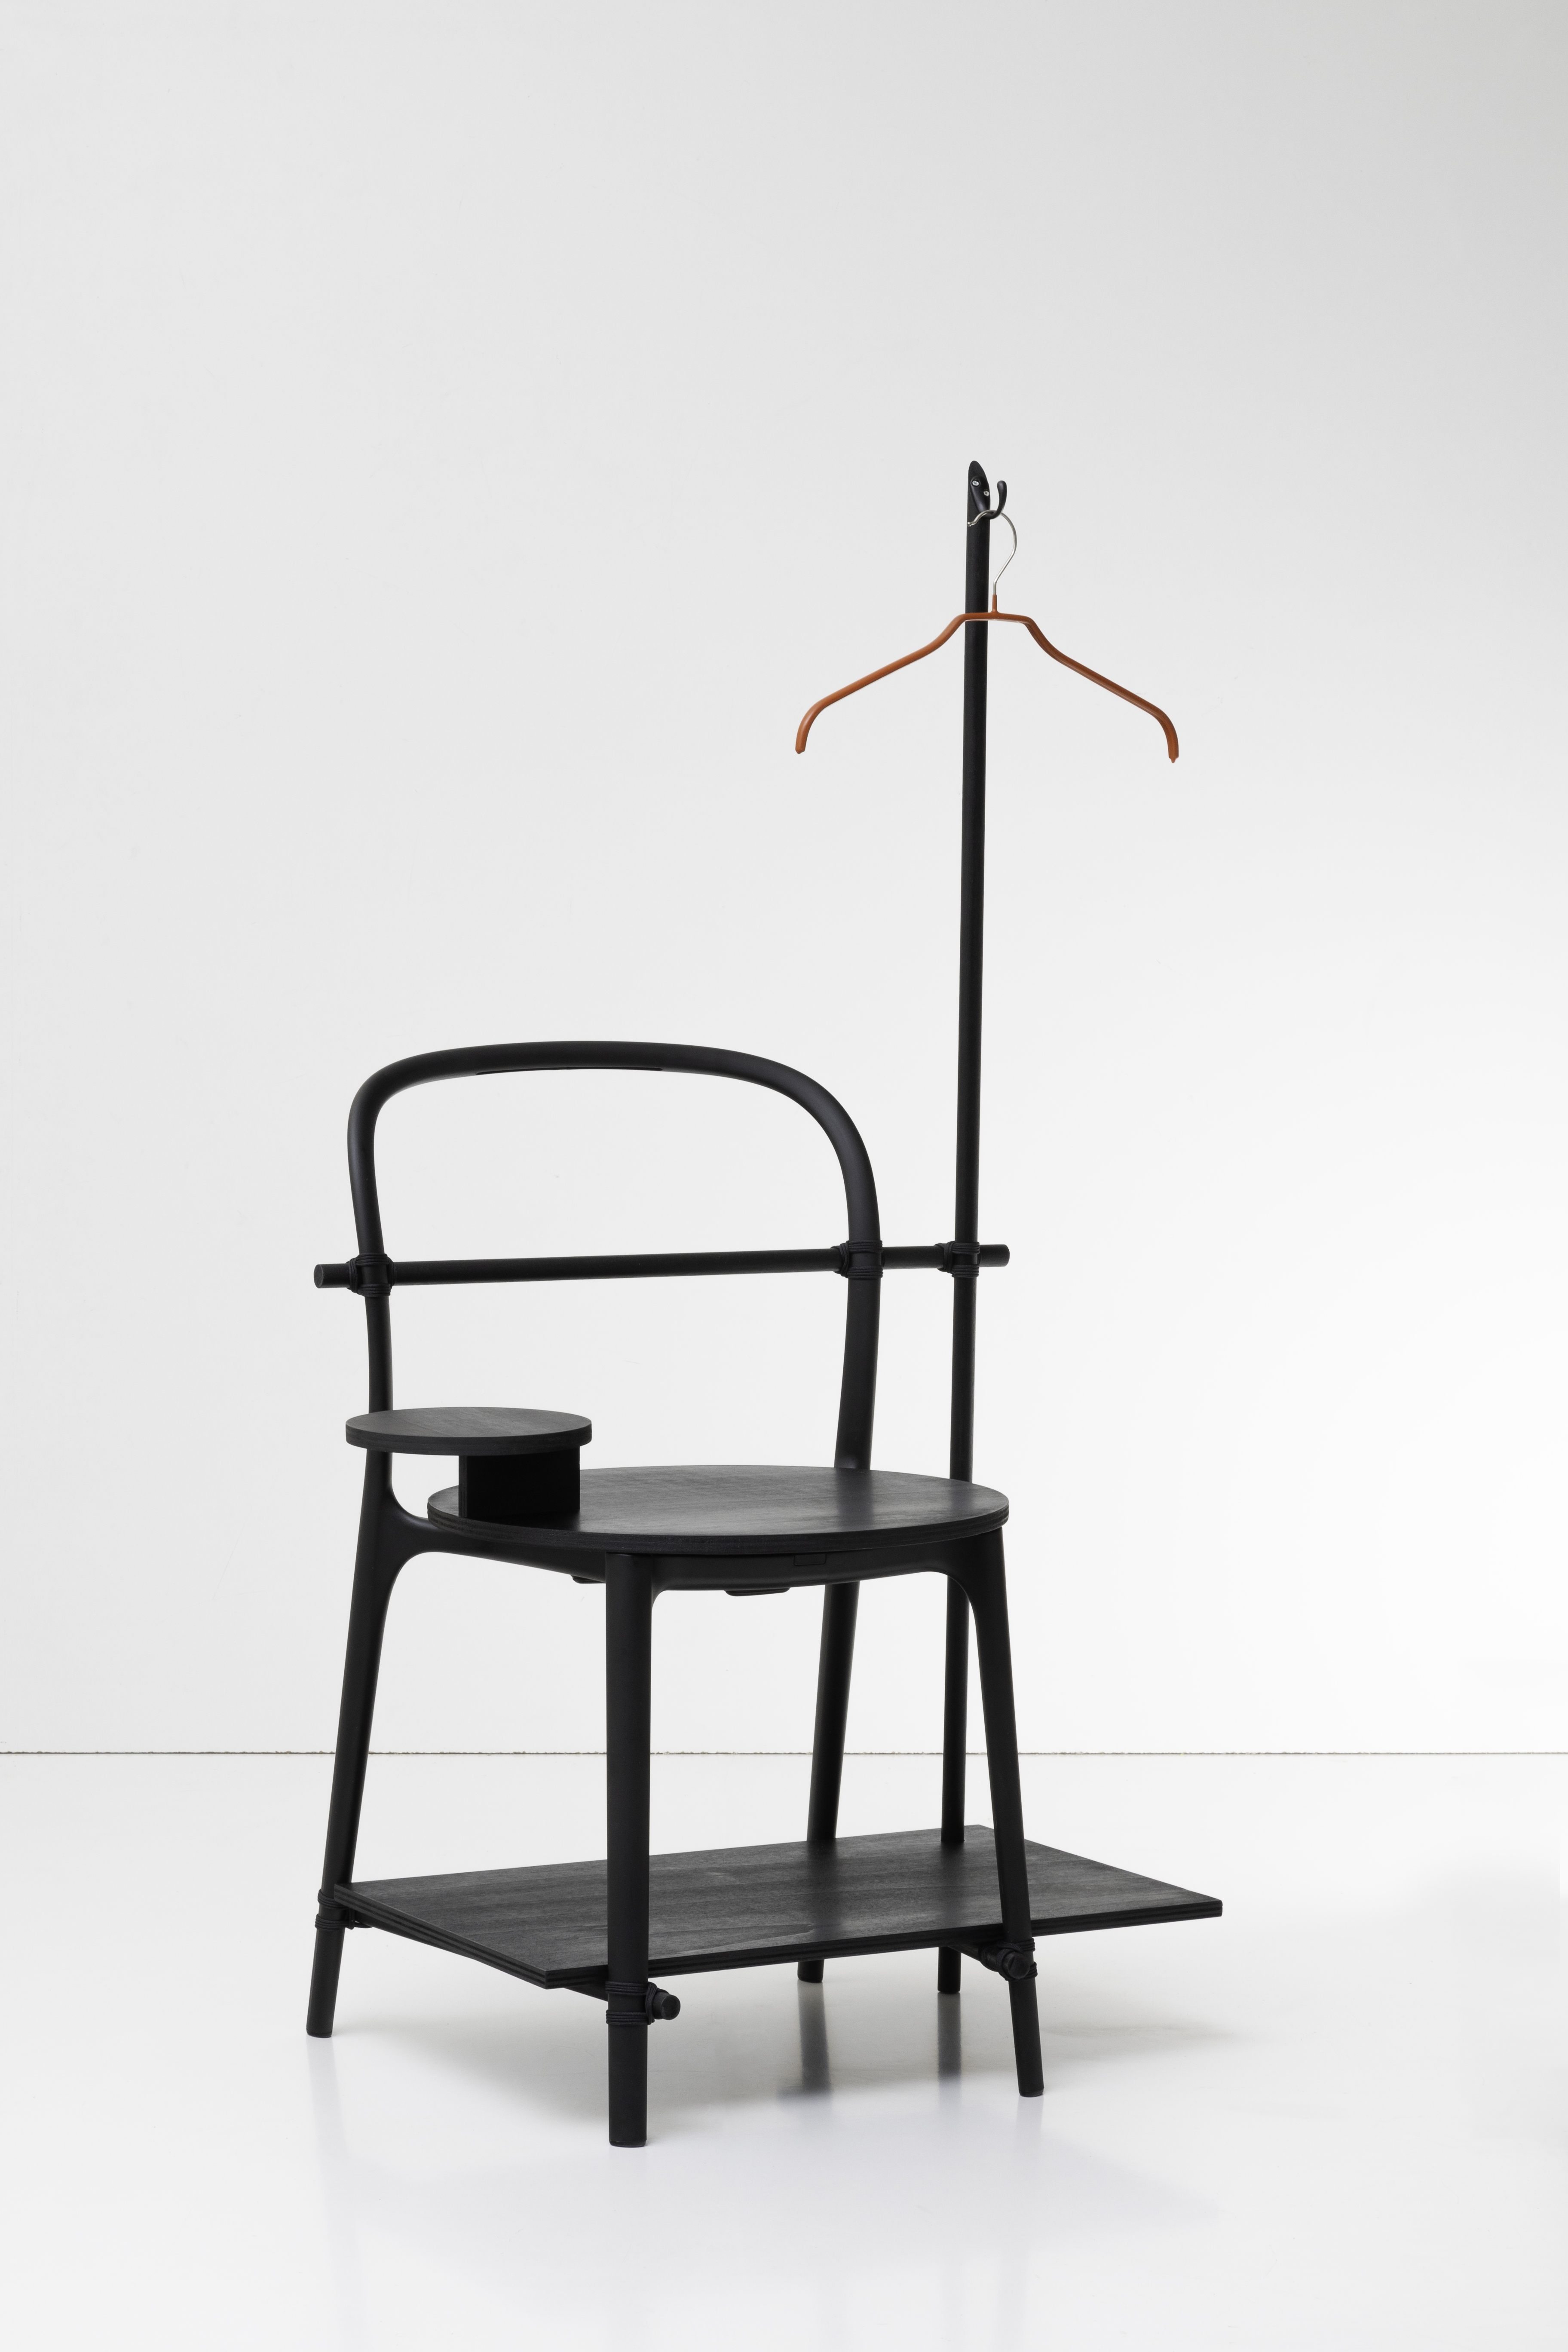 Belleville Chair reimagined as valet stand